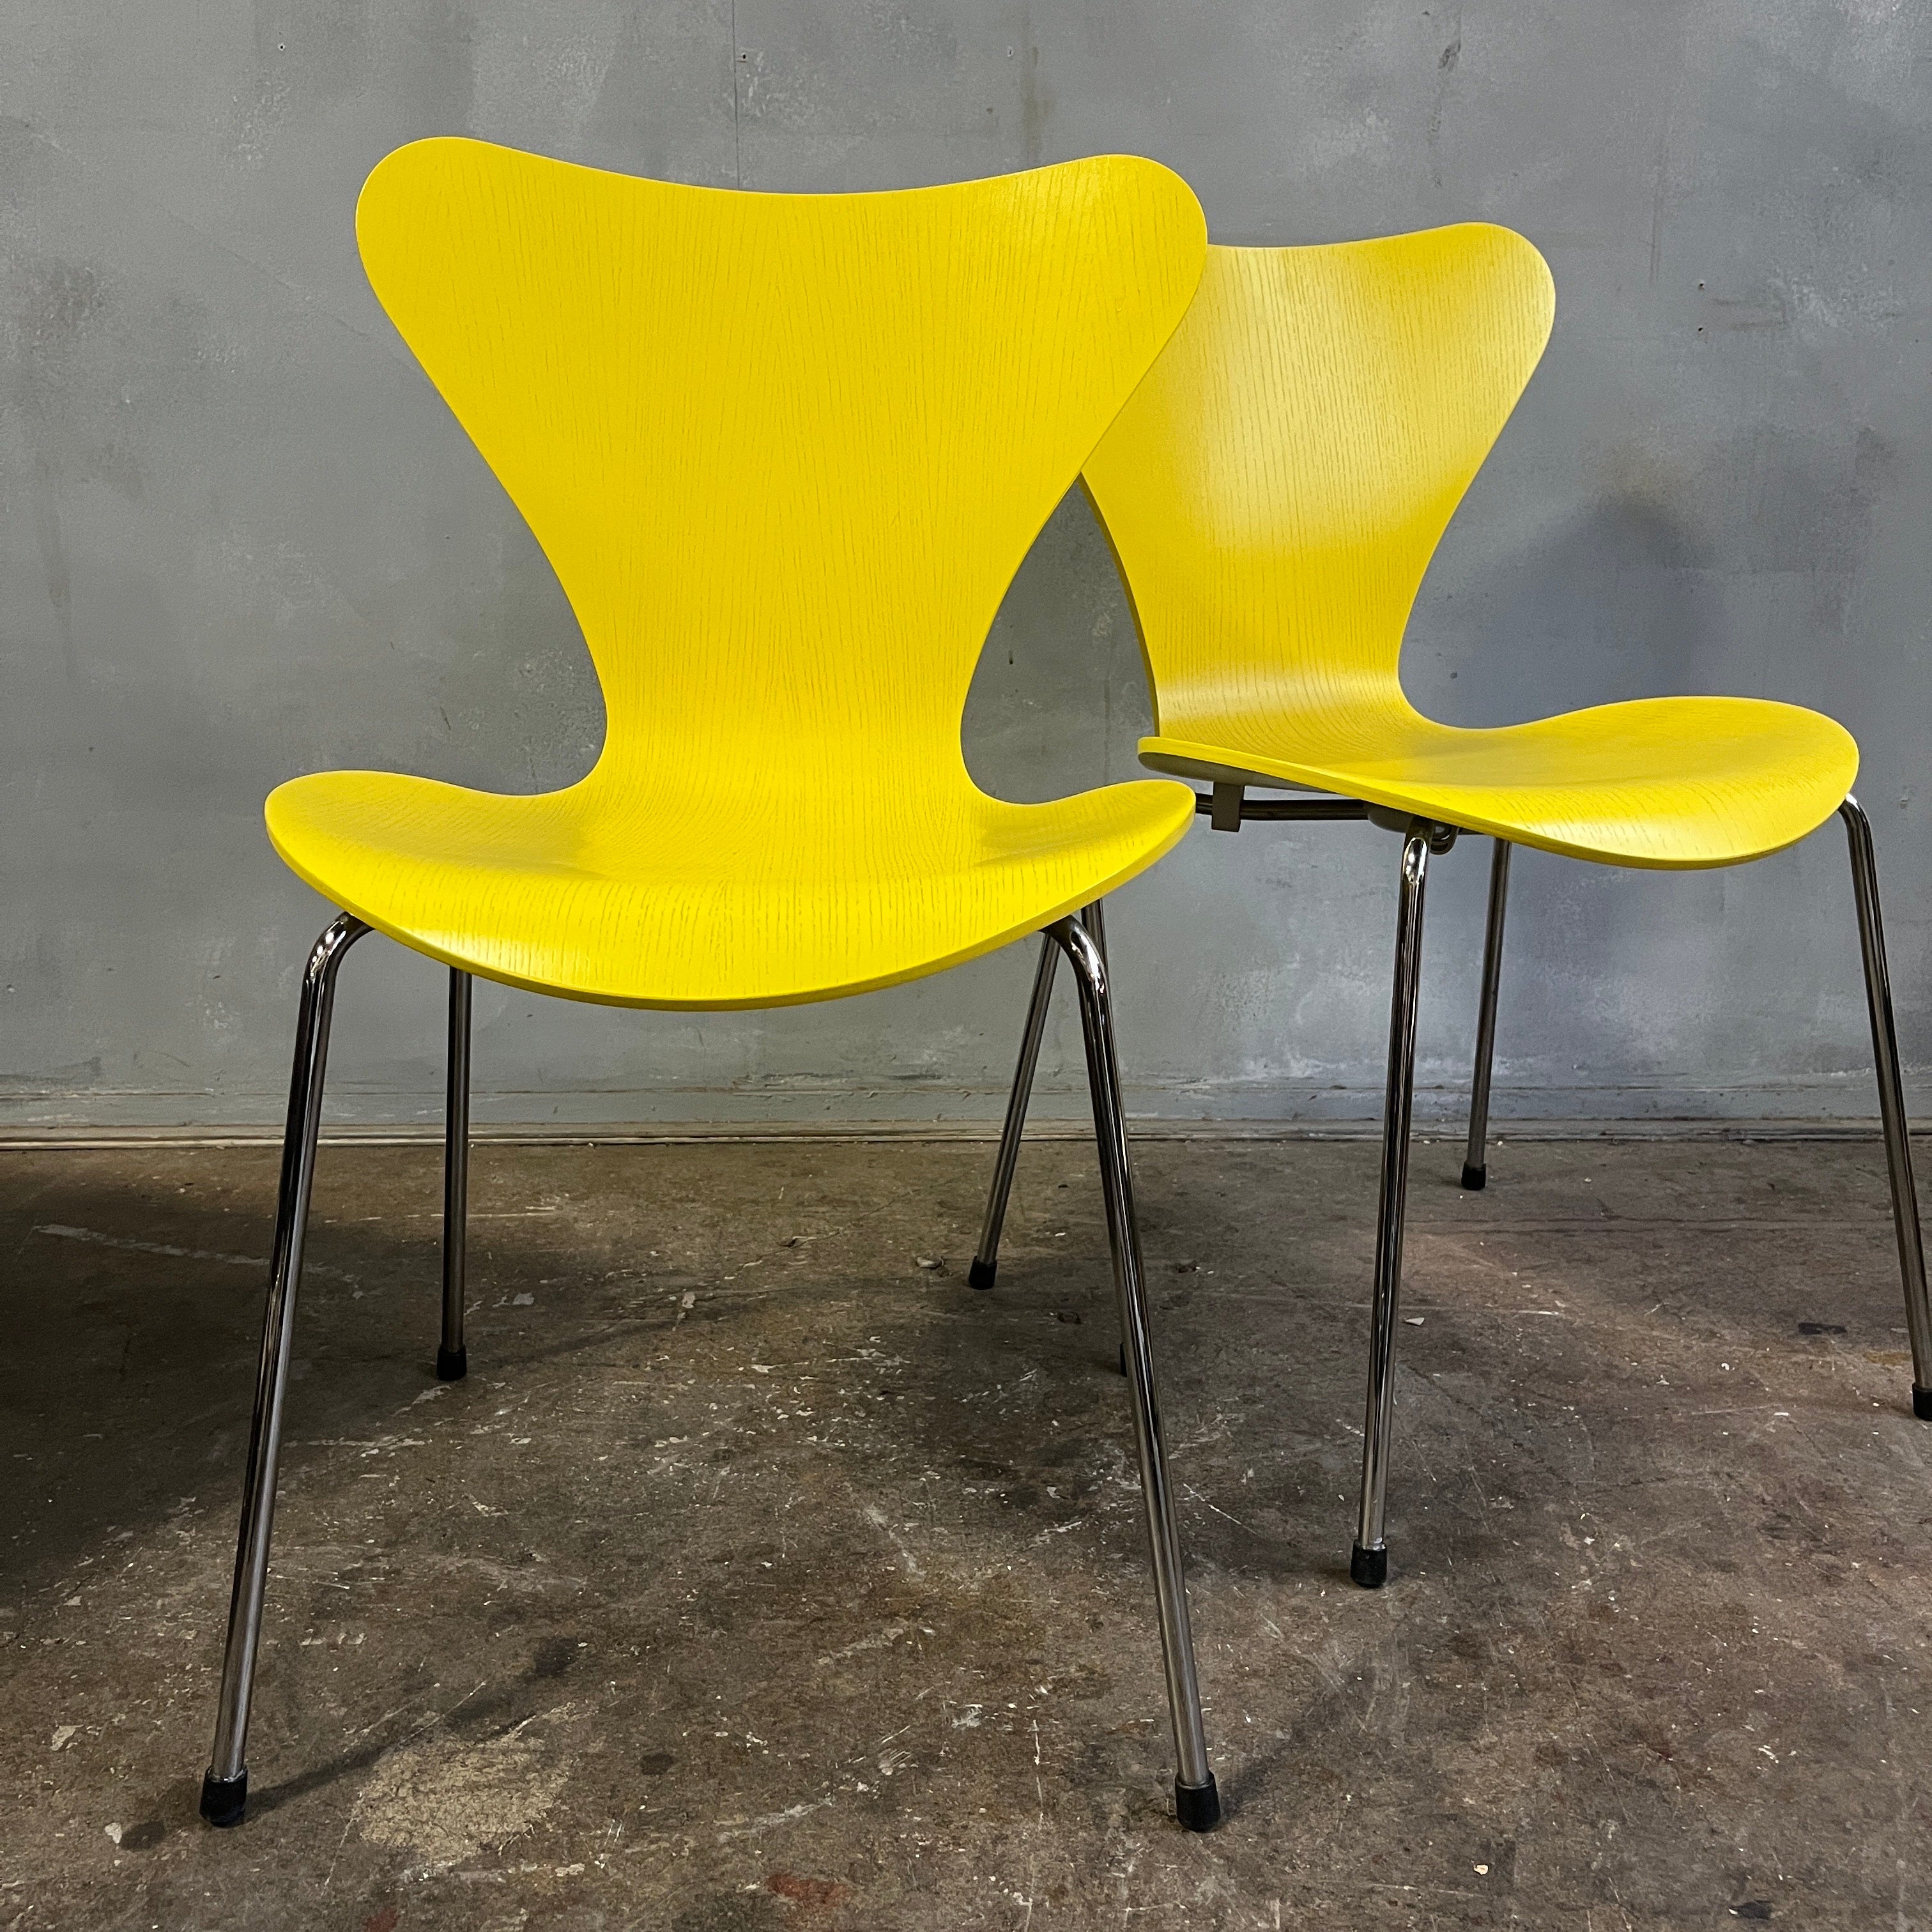 Midcentury Arne Jacobsen Series 7 Chairs Sunny Yellow For Sale 3